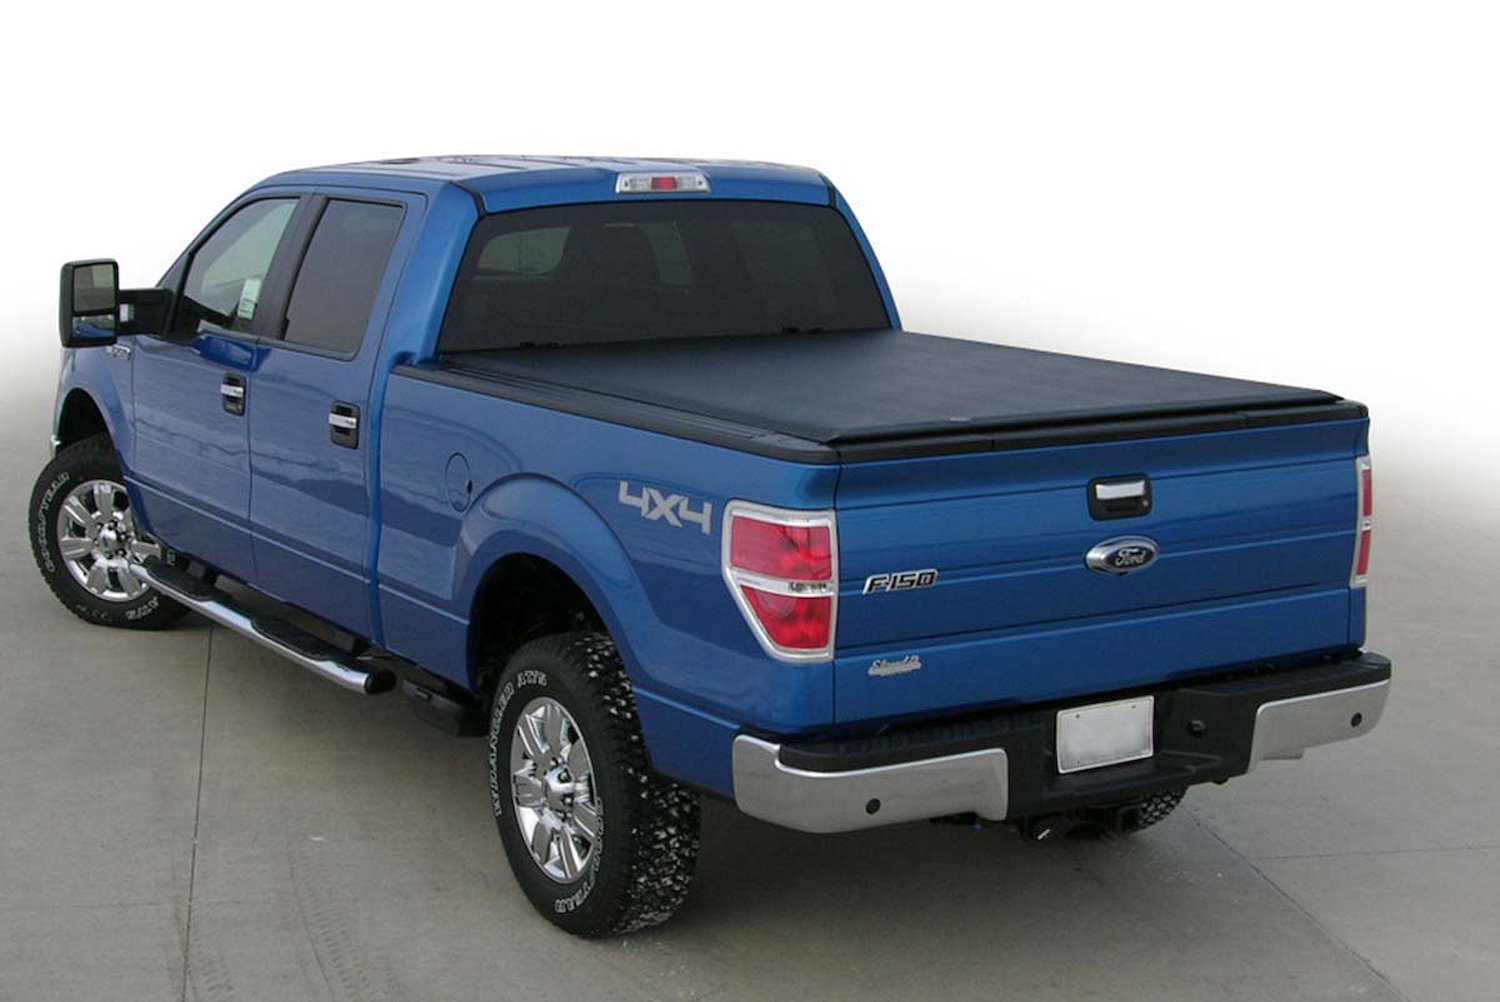 LORADO Roll-Up Tonneau Cover, Fits Select Ford Maverick, with 4 ft. 5 in. Bed